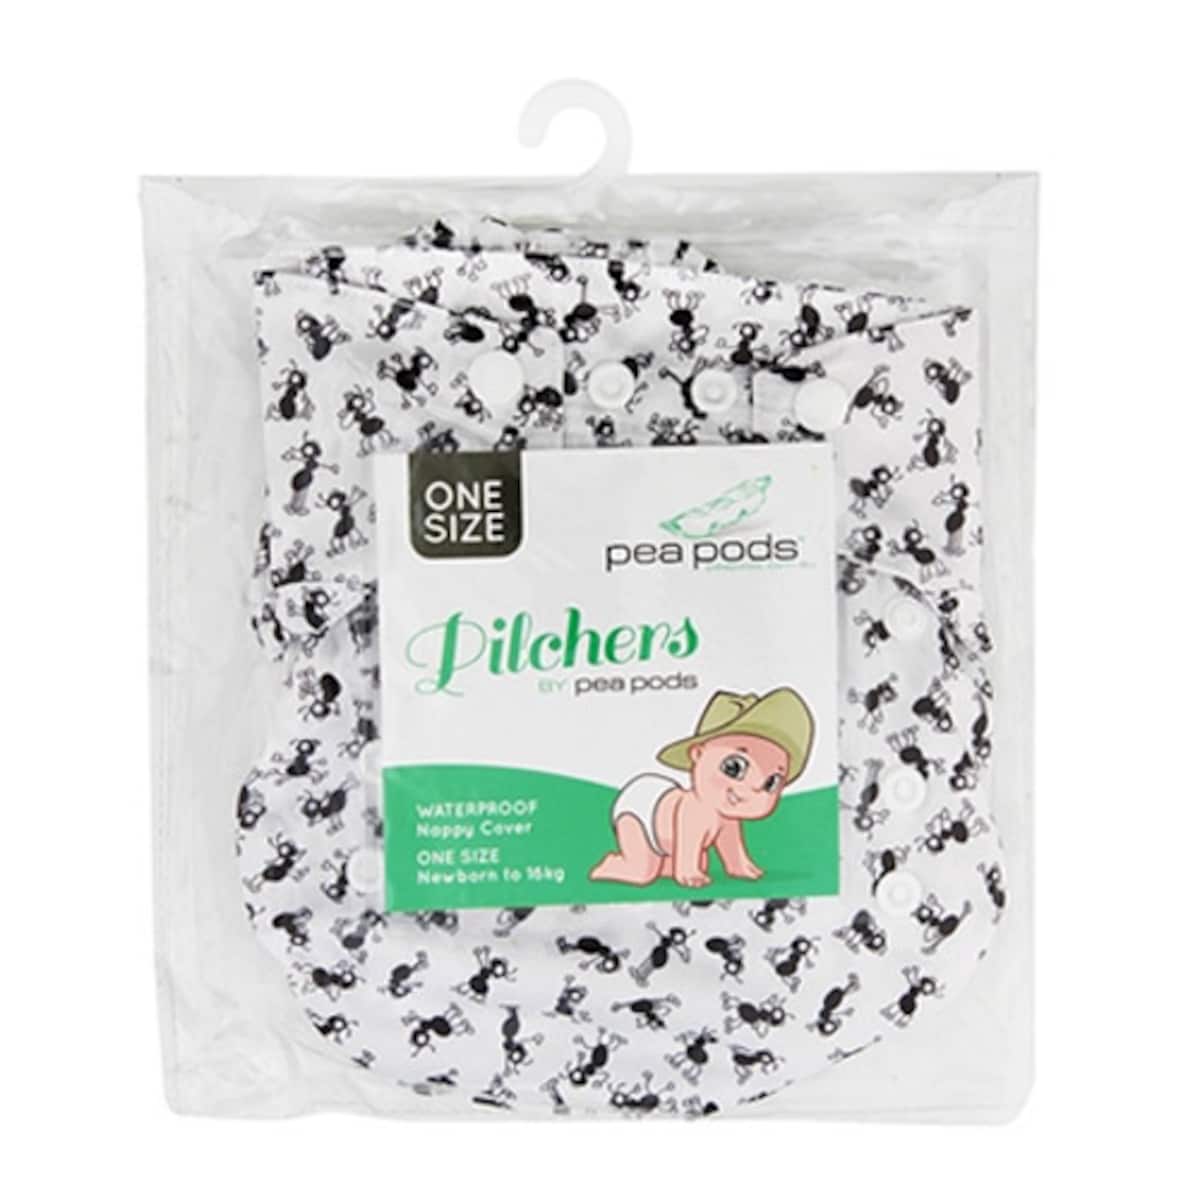 Pea Pods Pilchers Waterproof Nappy Covers Ant Print